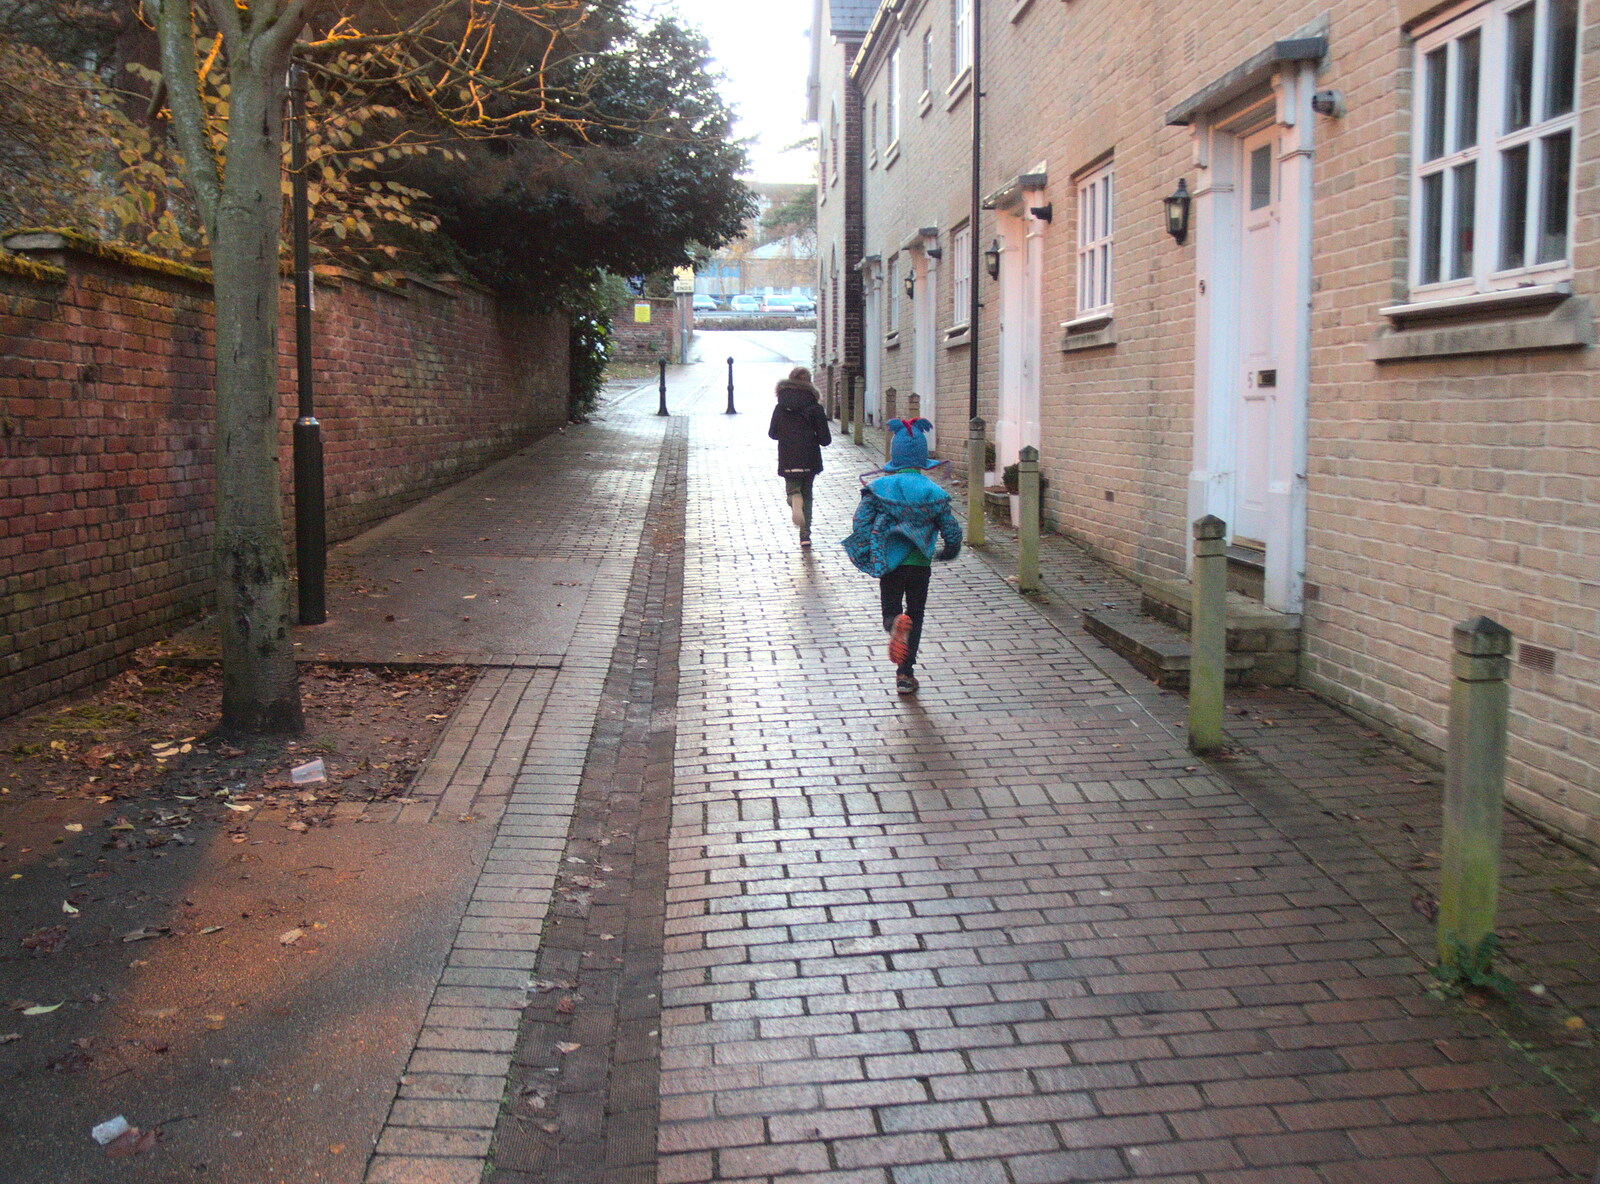 The boys run up St. Julian's Alley from A Trip to the Cinema, Norwich, Norfolk - 3rd December 2017